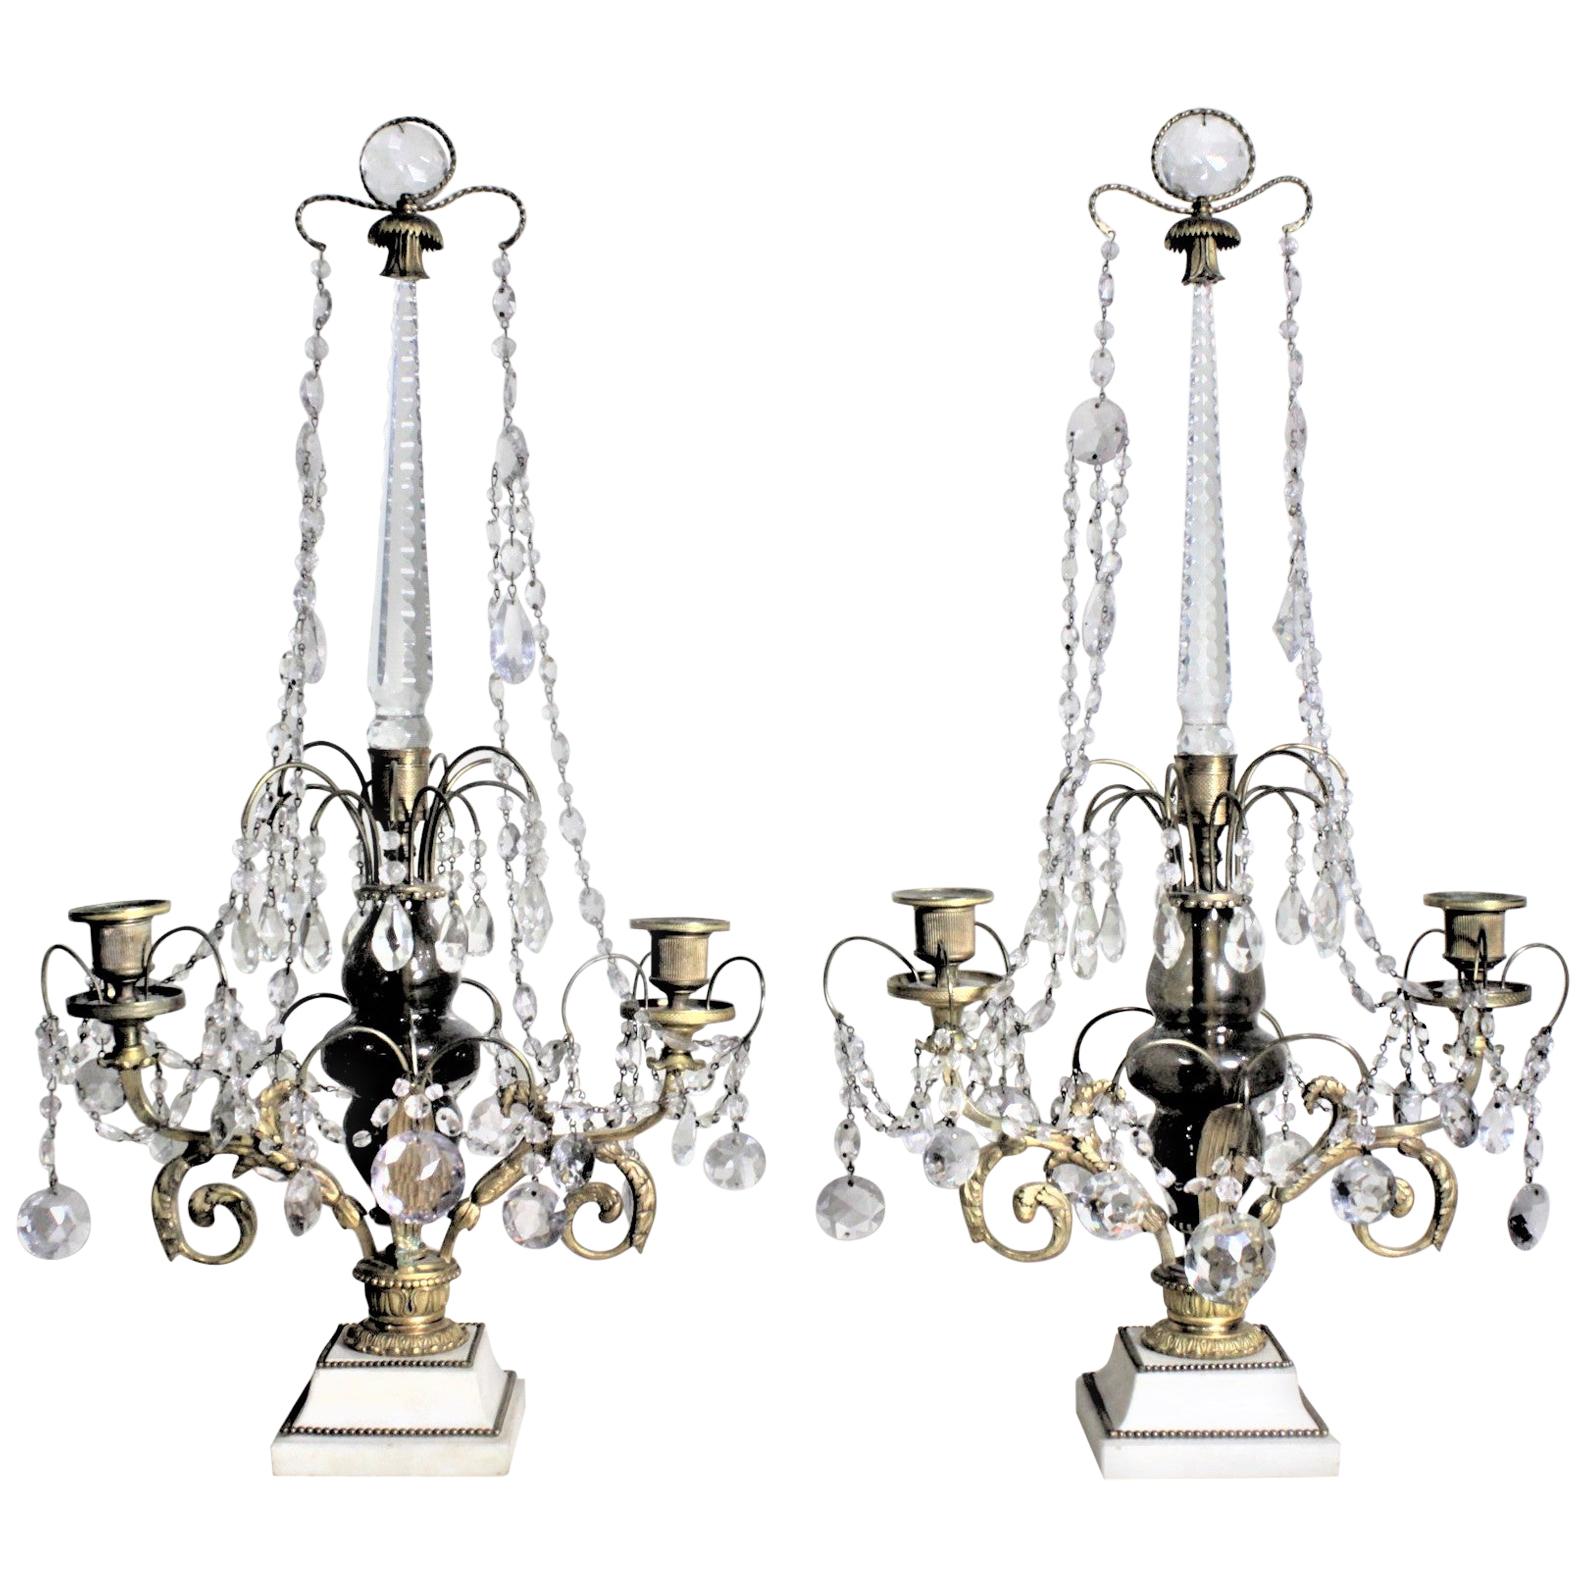 Pair of Antique Elaborate Gilt Bronze and Crystal Candelabras or Candleholders